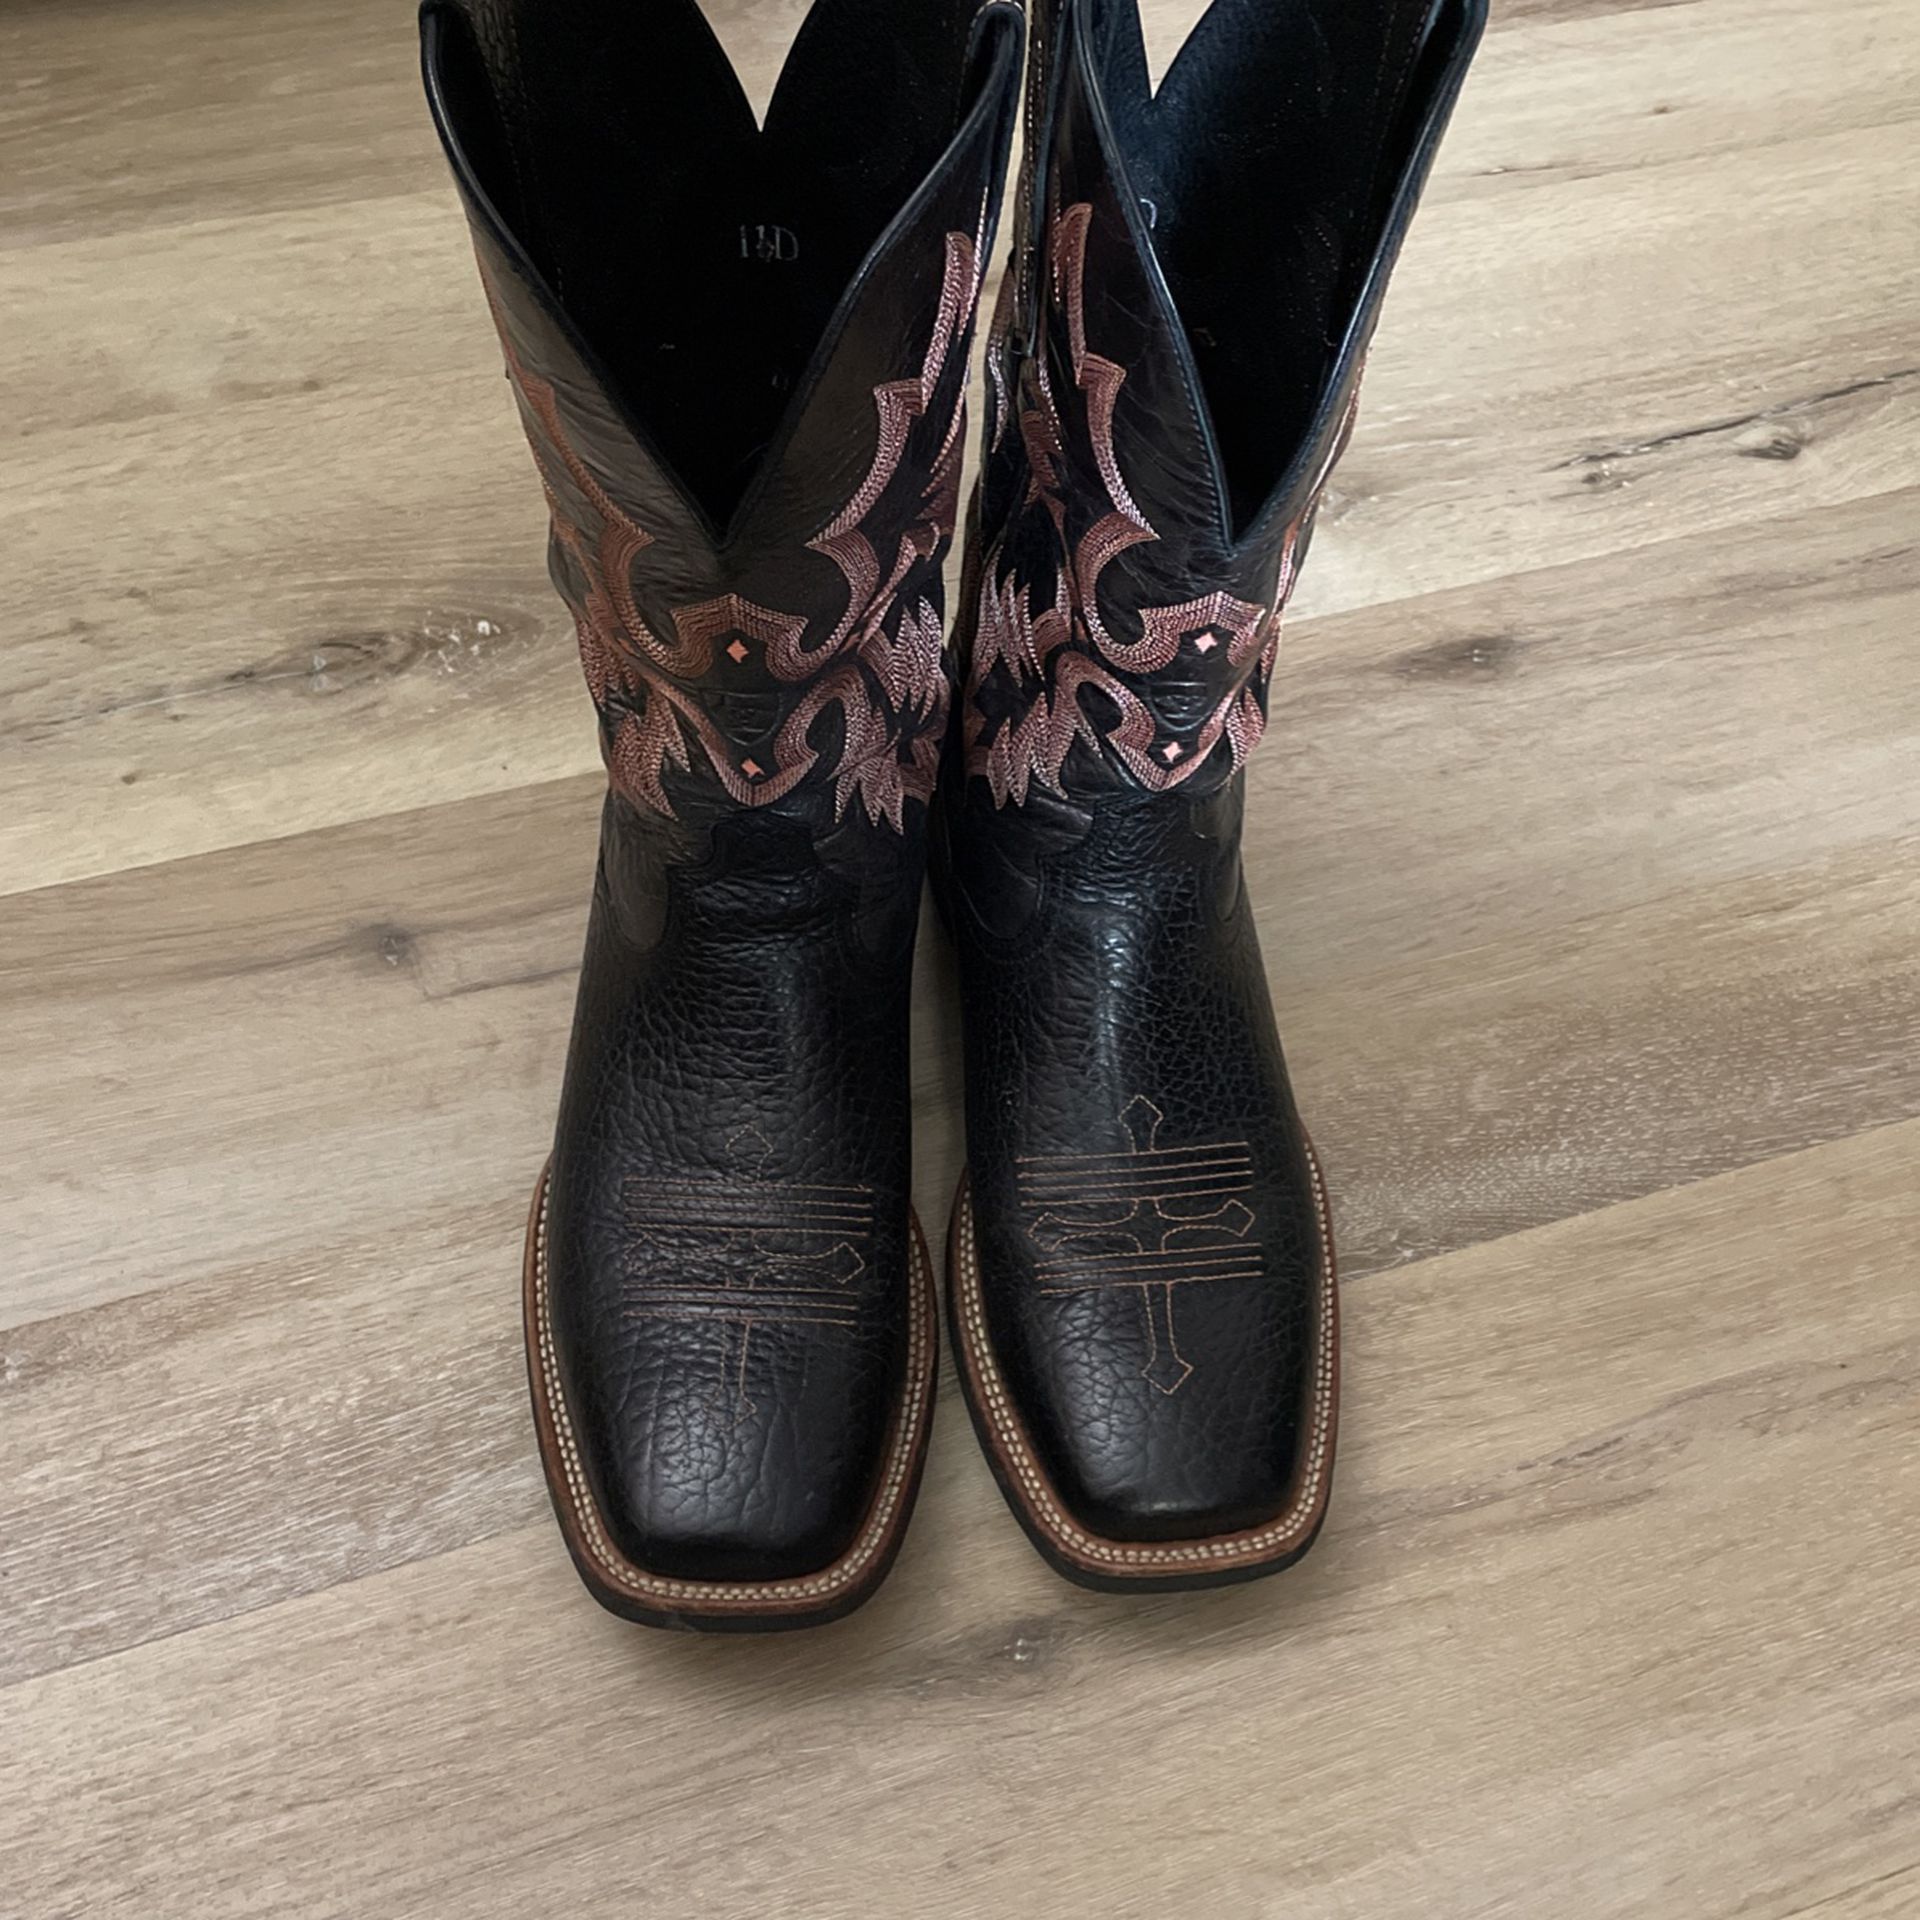 ARIAT Black Leather Boots Rubber Soles